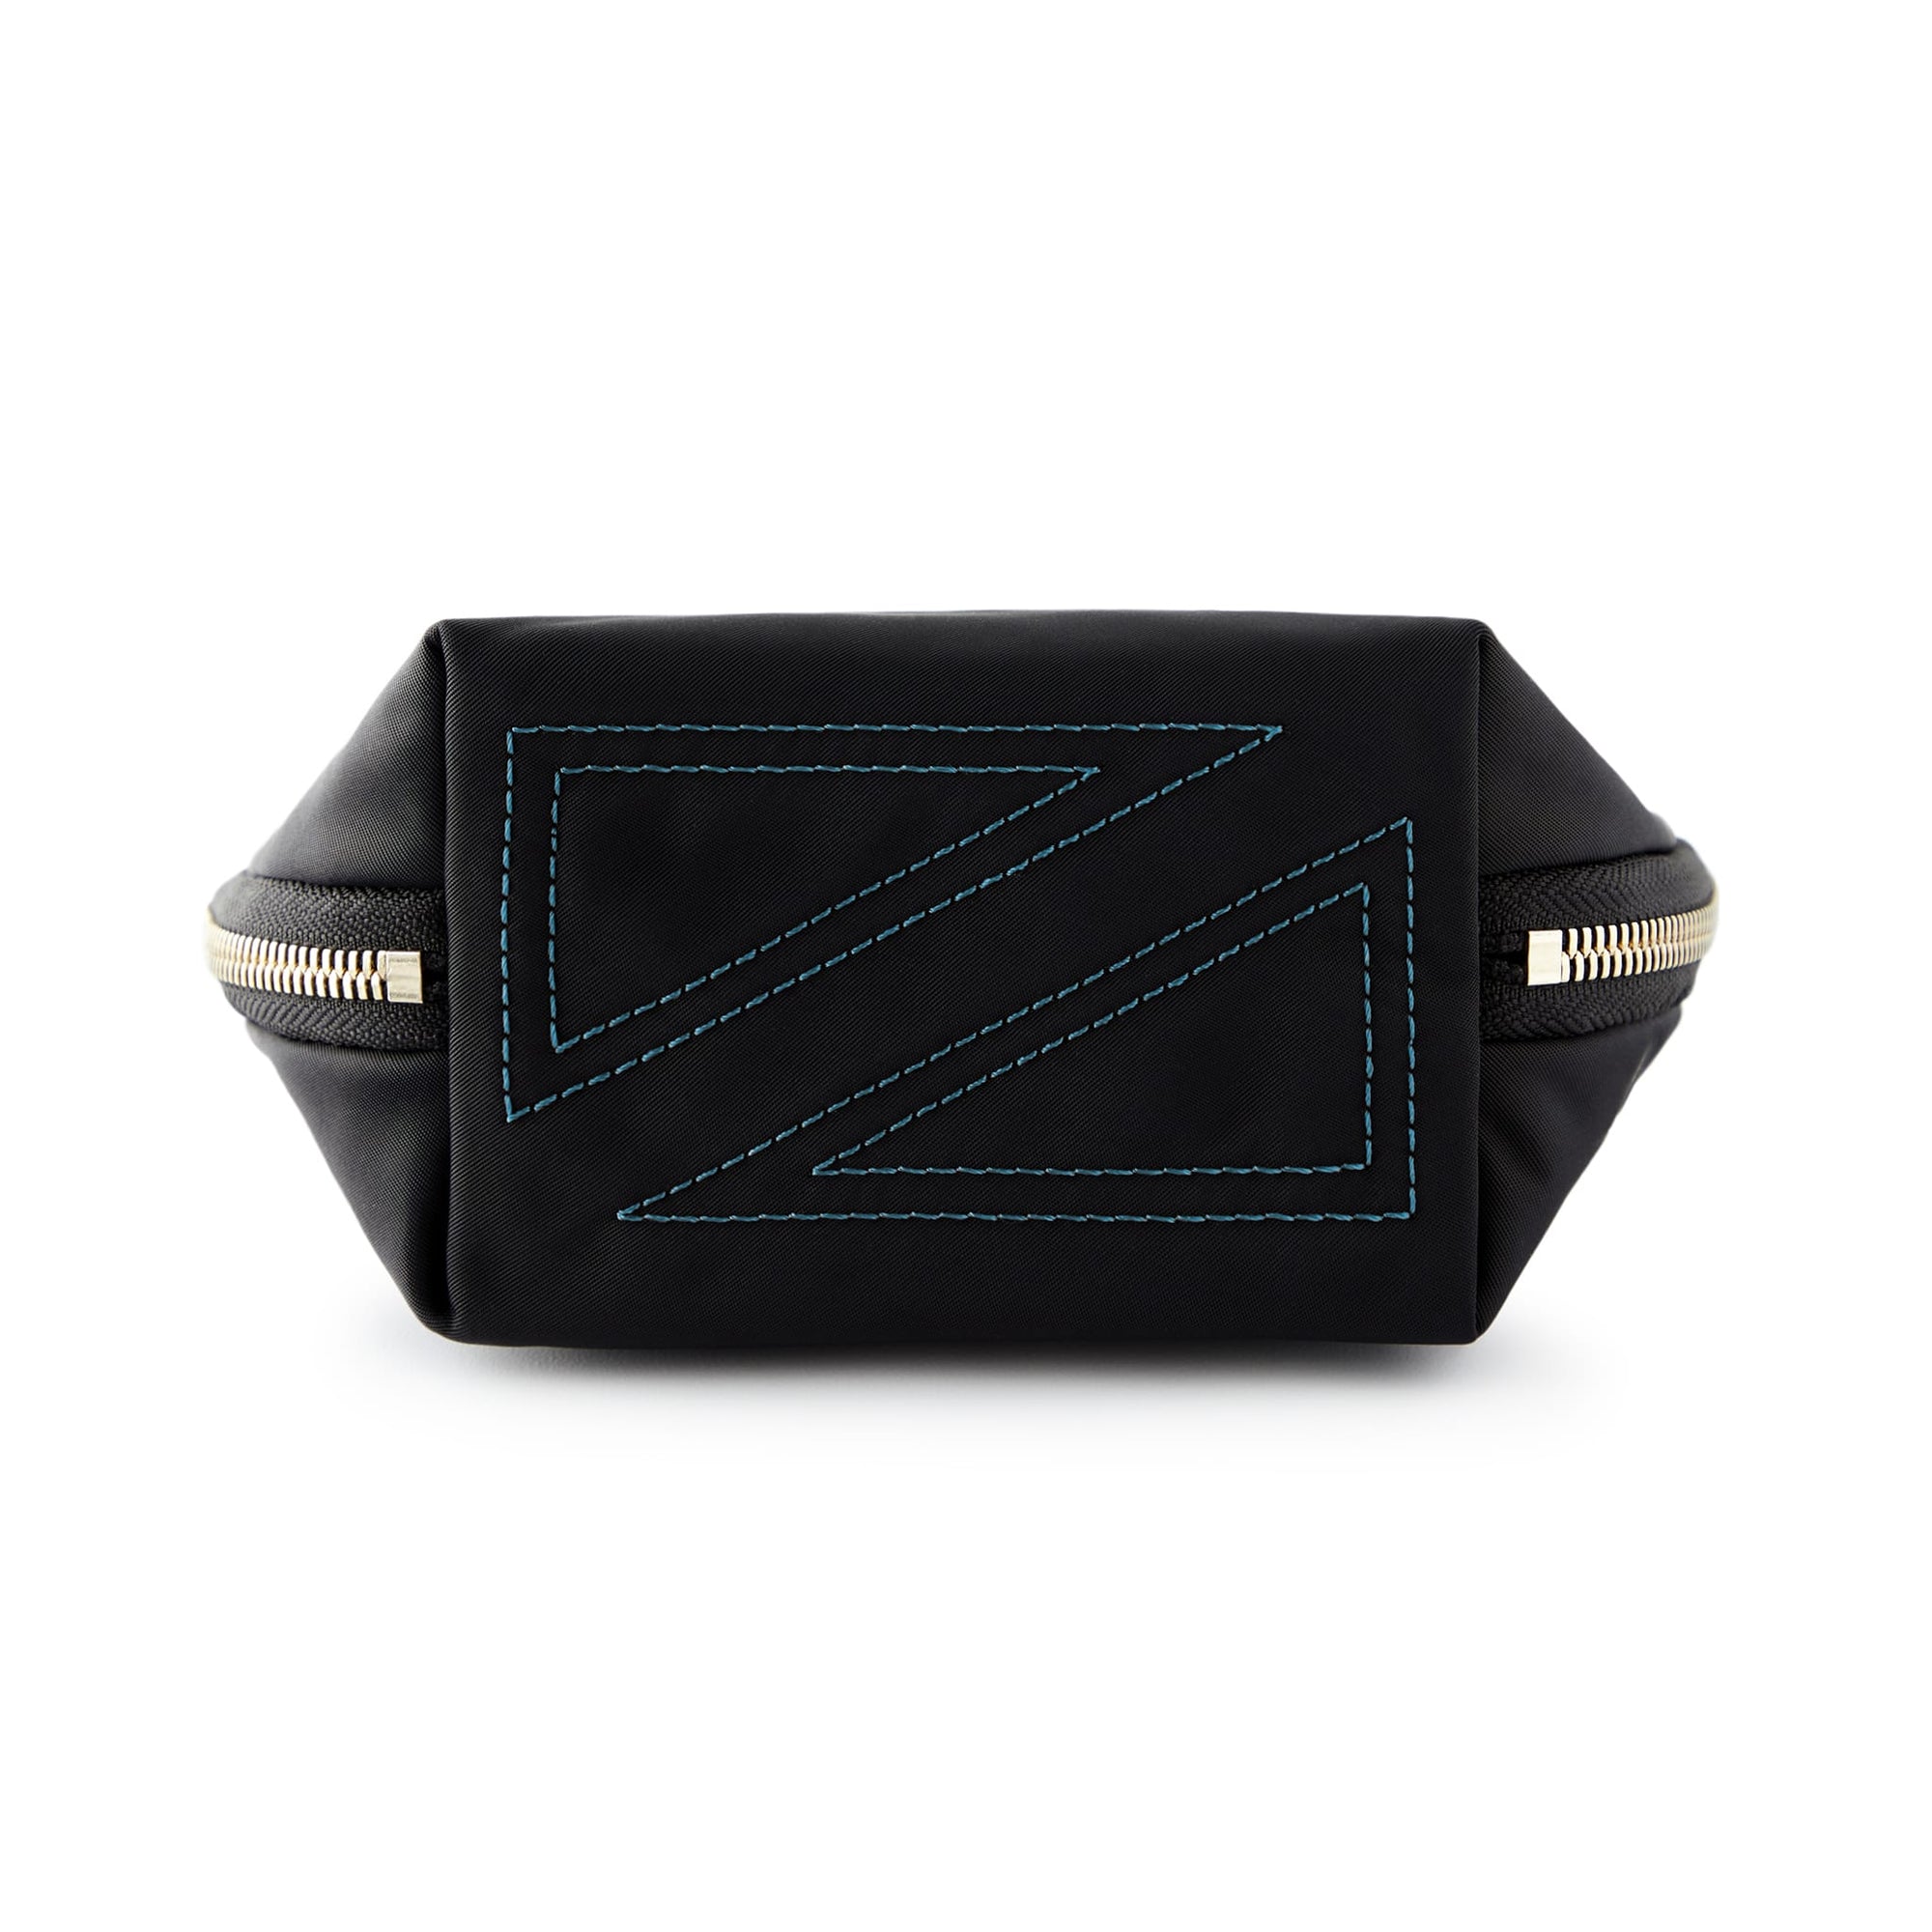 color: Everyday+Satin Black Fabric with Teal Interior; alt: Everyday Small Makeup Bag | KUSSHI